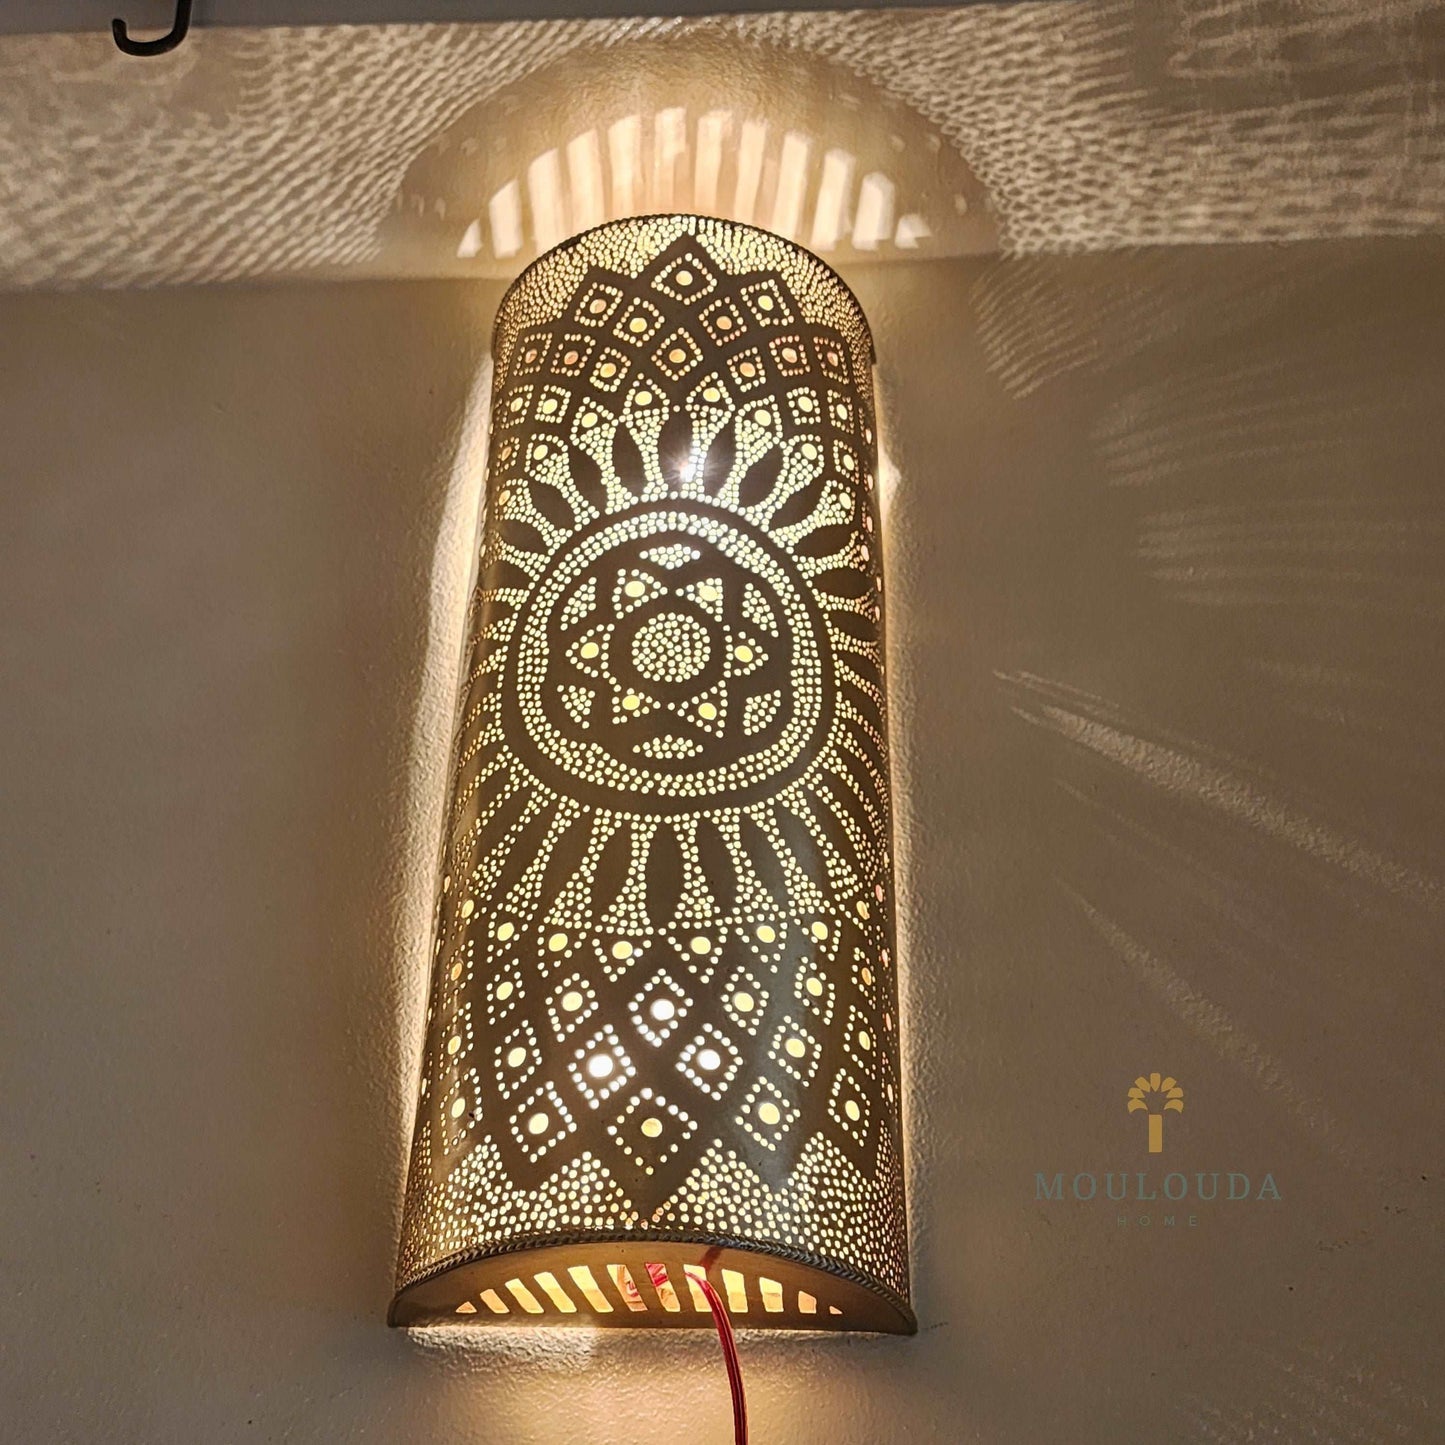 Elevate Your Decor with a Moroccan Brass Chandelier - Luxury Pendant Lamp for Your Home - Mouloudahome